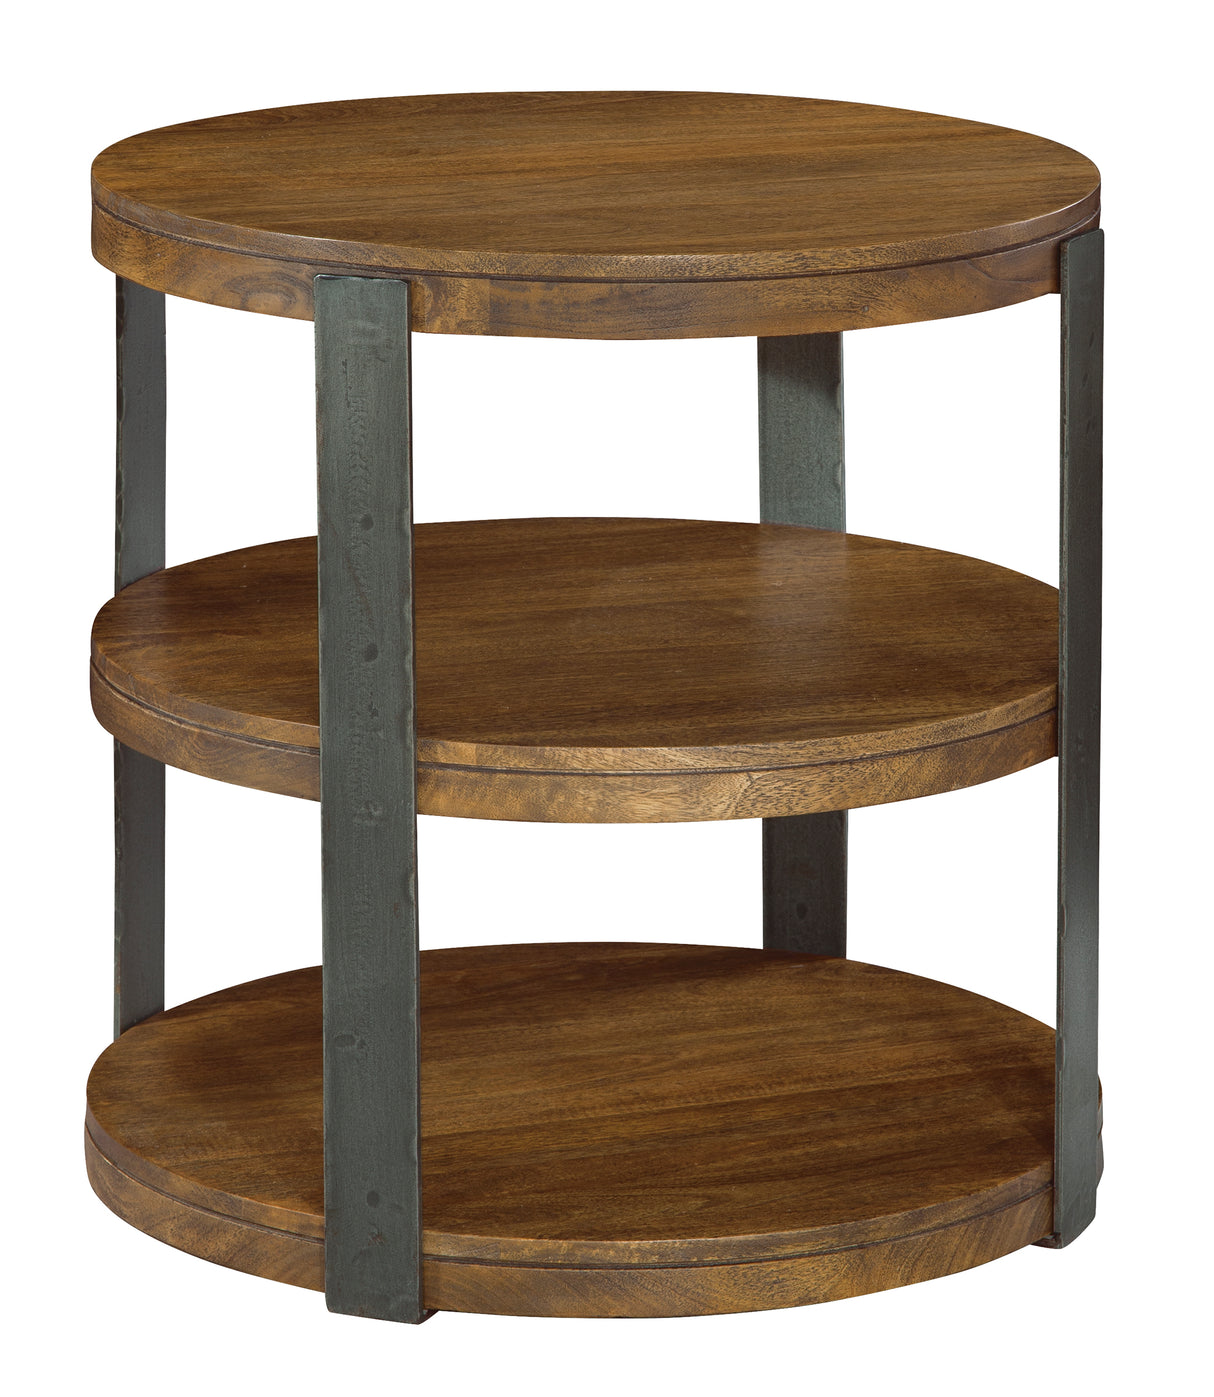 Hekman 23706 Bedford Park 26in. x 26in. x 28in. End Table